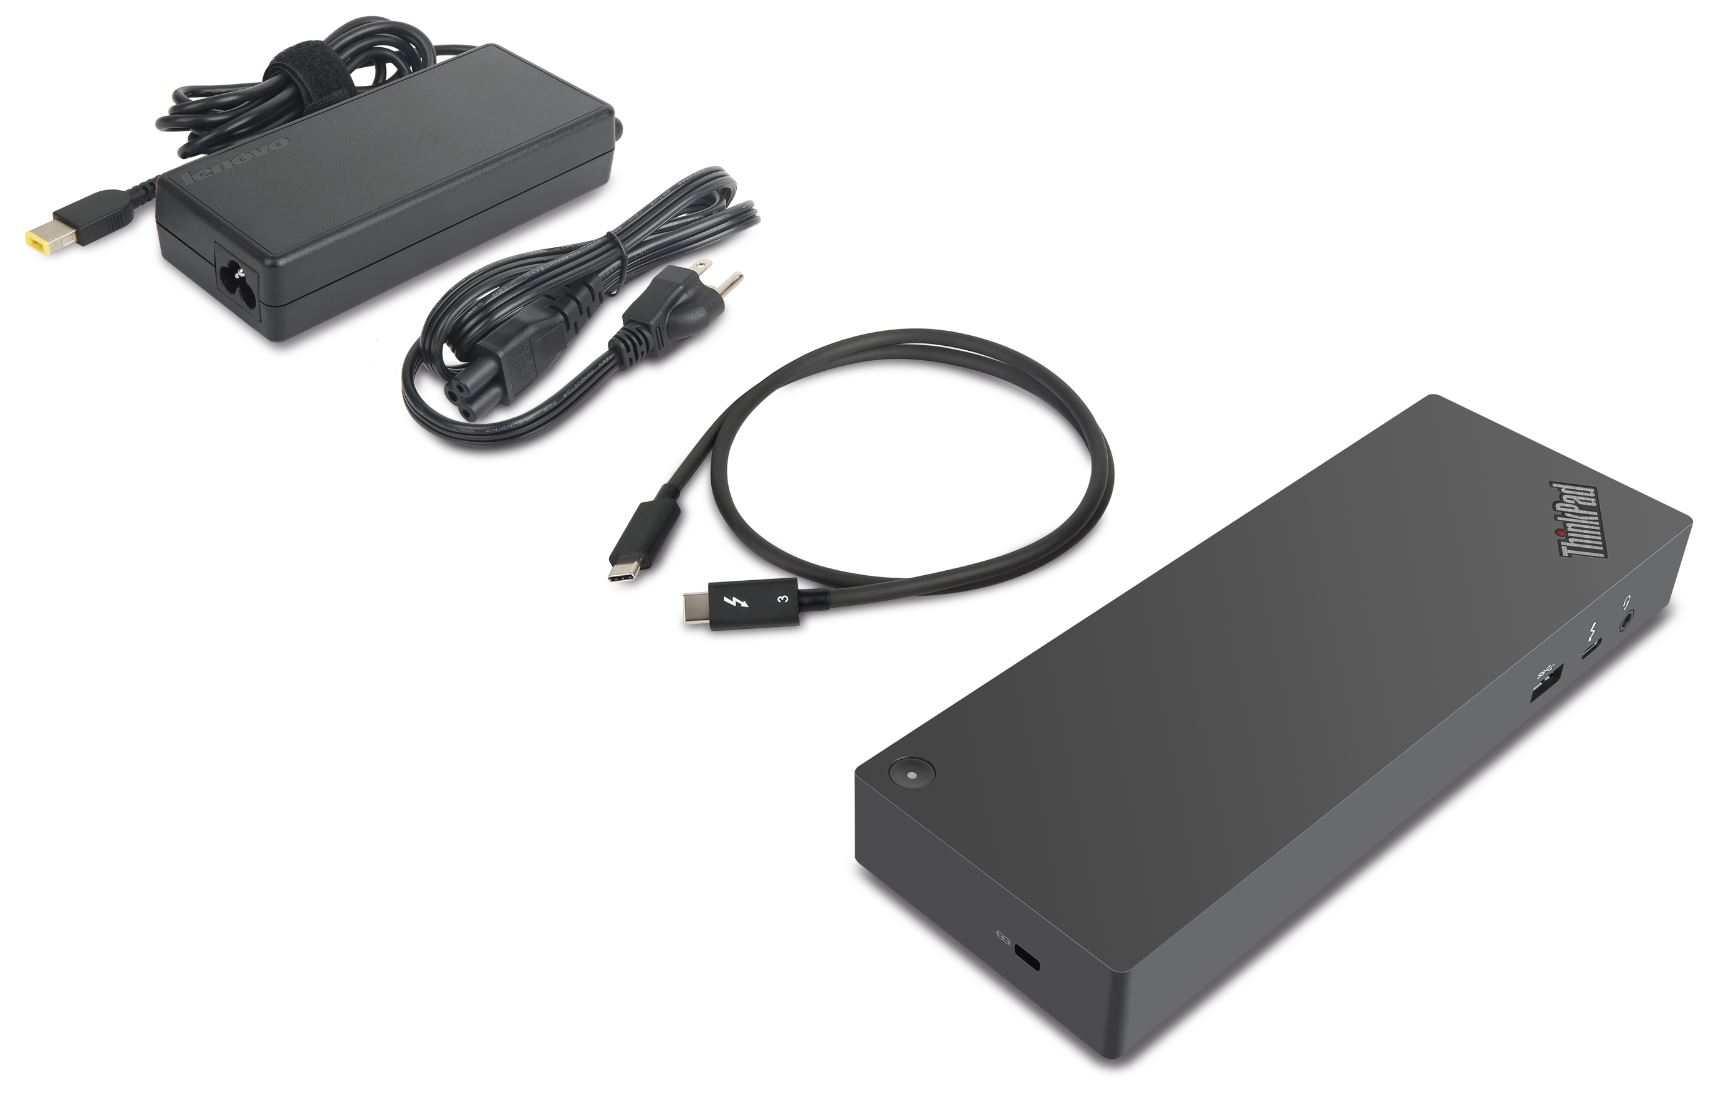 ThinkPad Thunderbolt 3 Dock Gen 2 - Overview and Service Parts - Lenovo  Support US